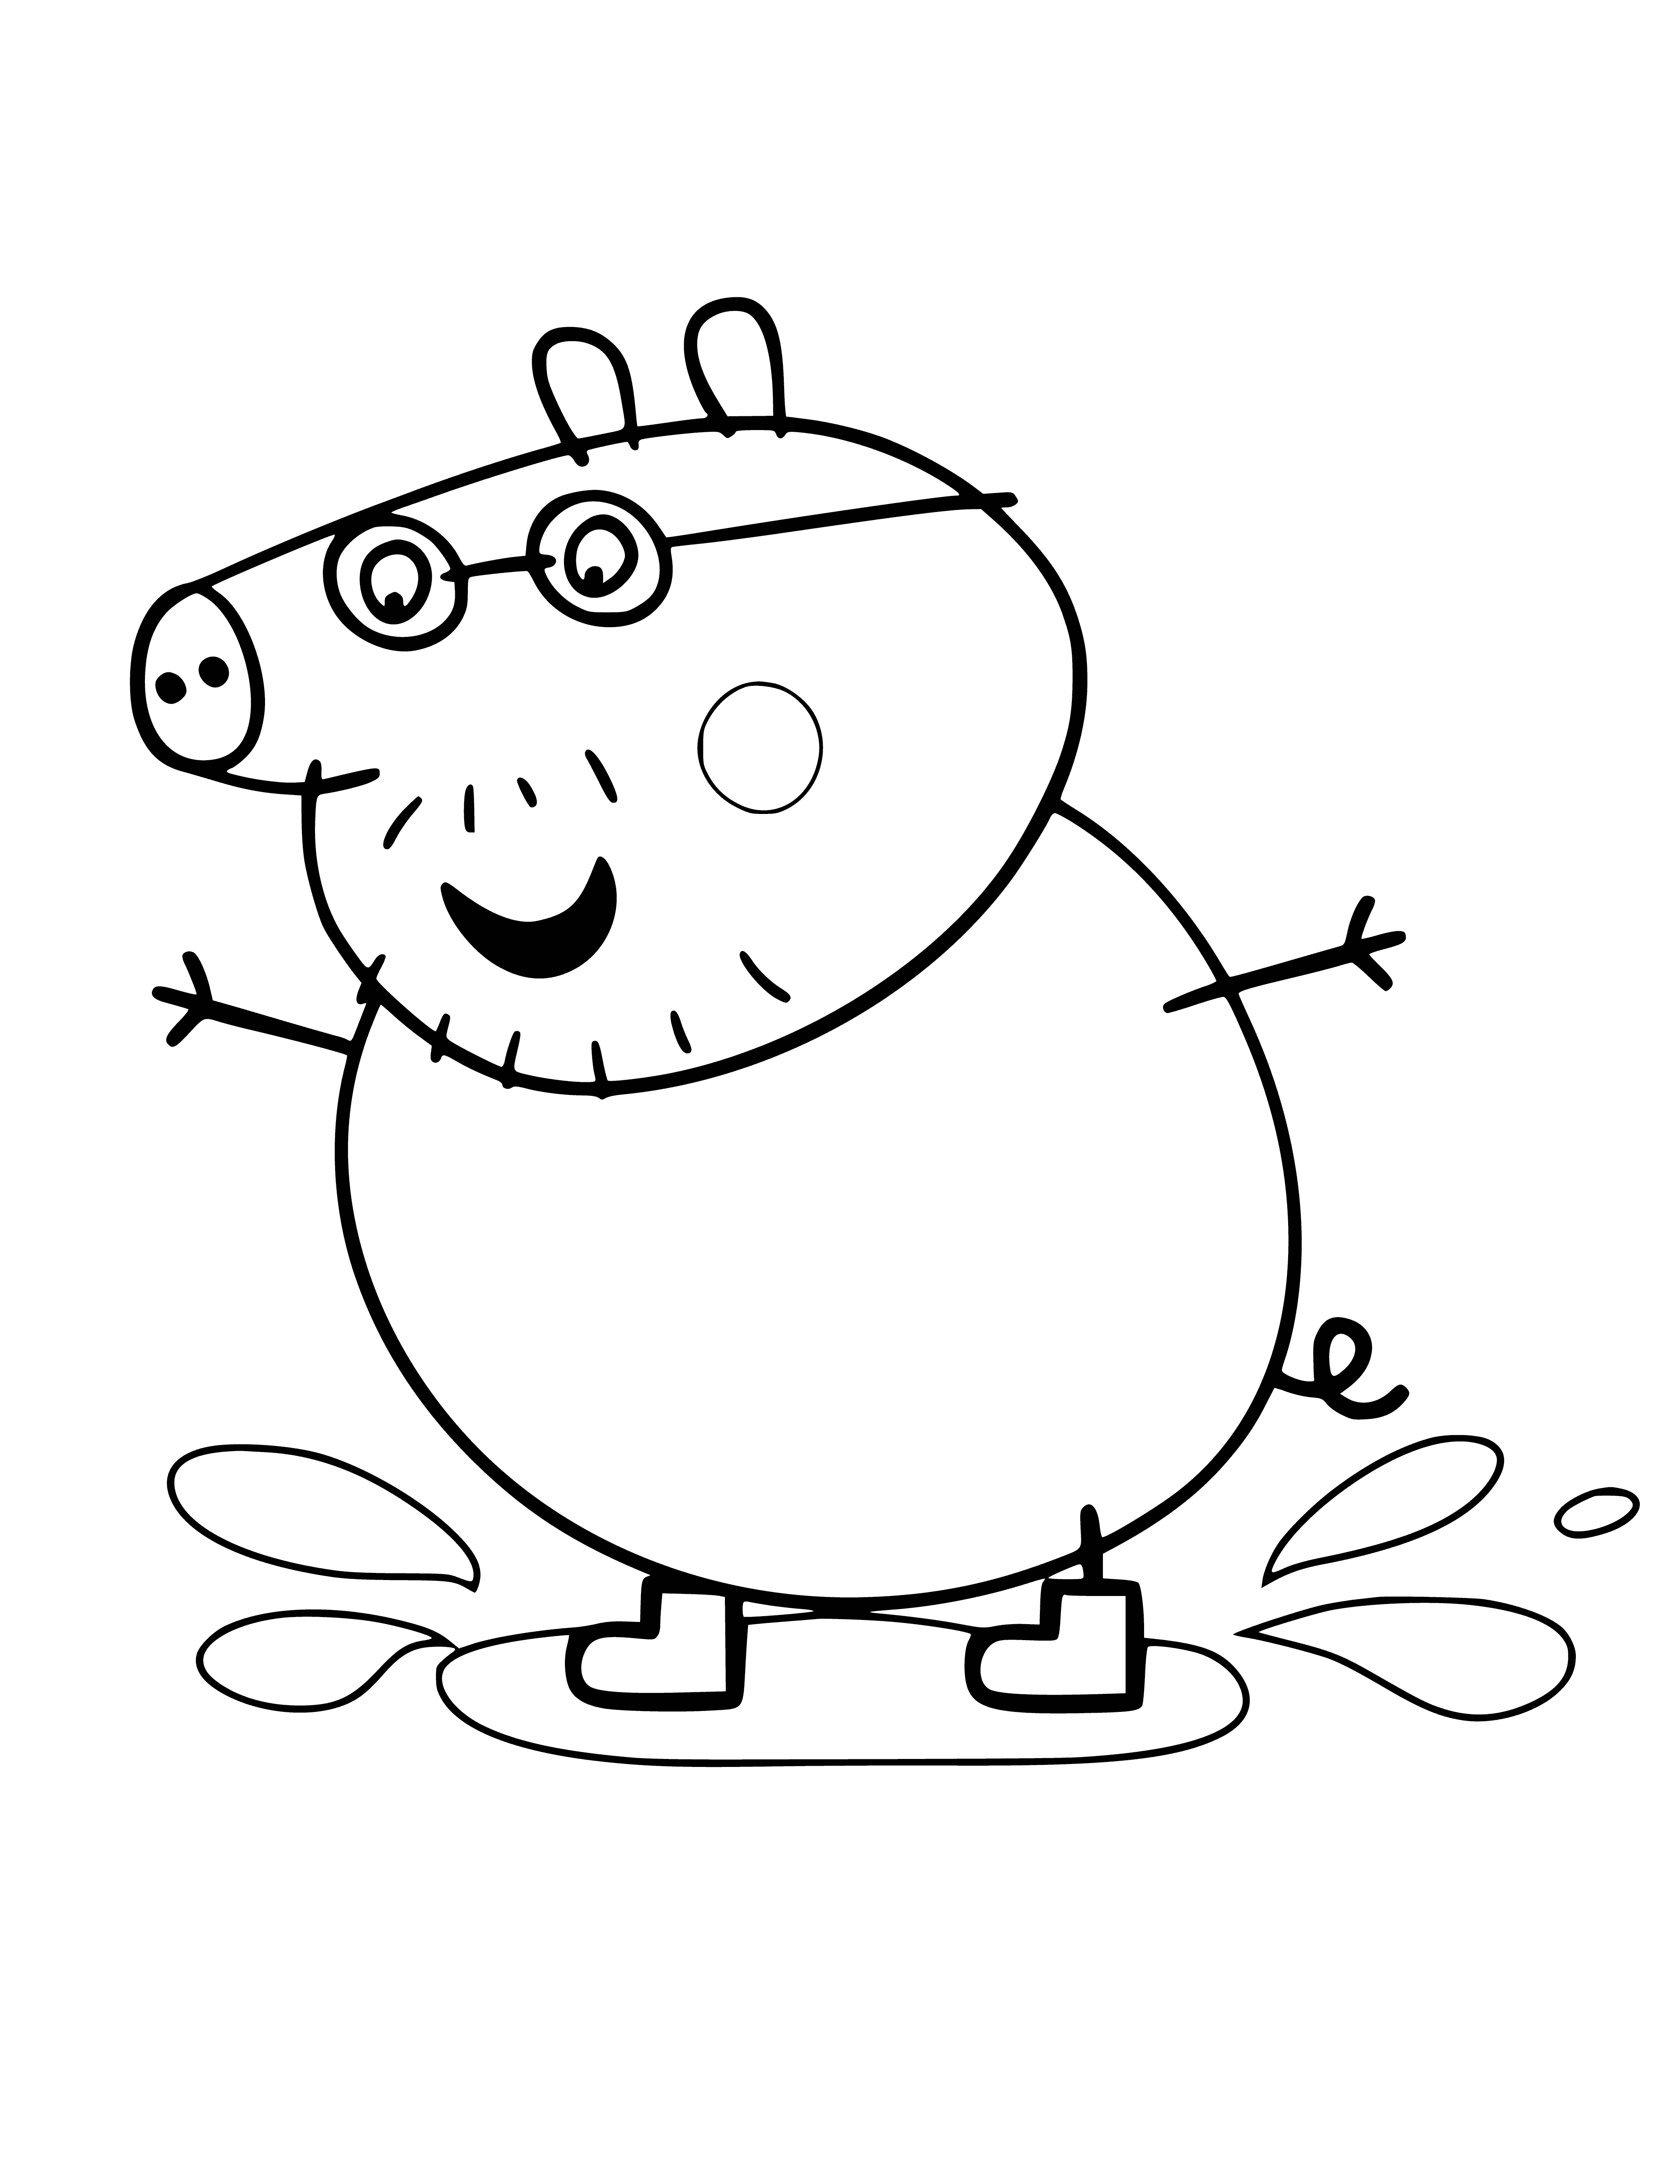 Daddy pig in a puddle coloring page